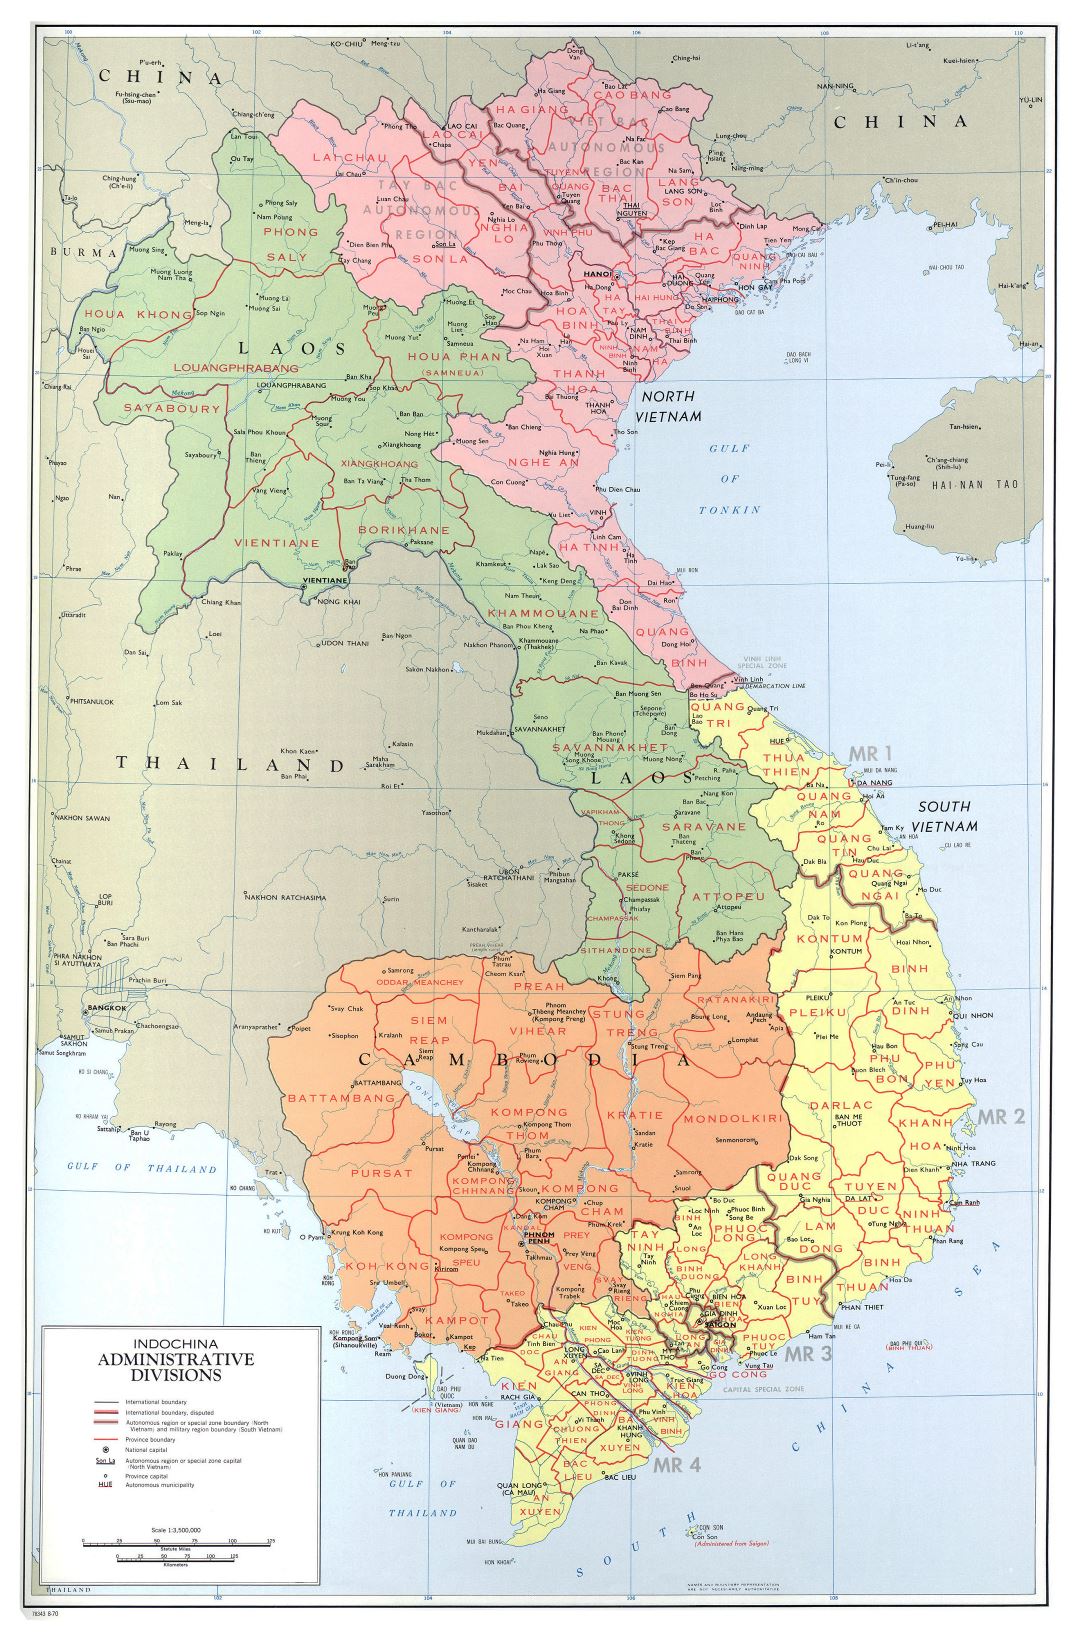 Large scale administrative divisions map of Indochina - 1970